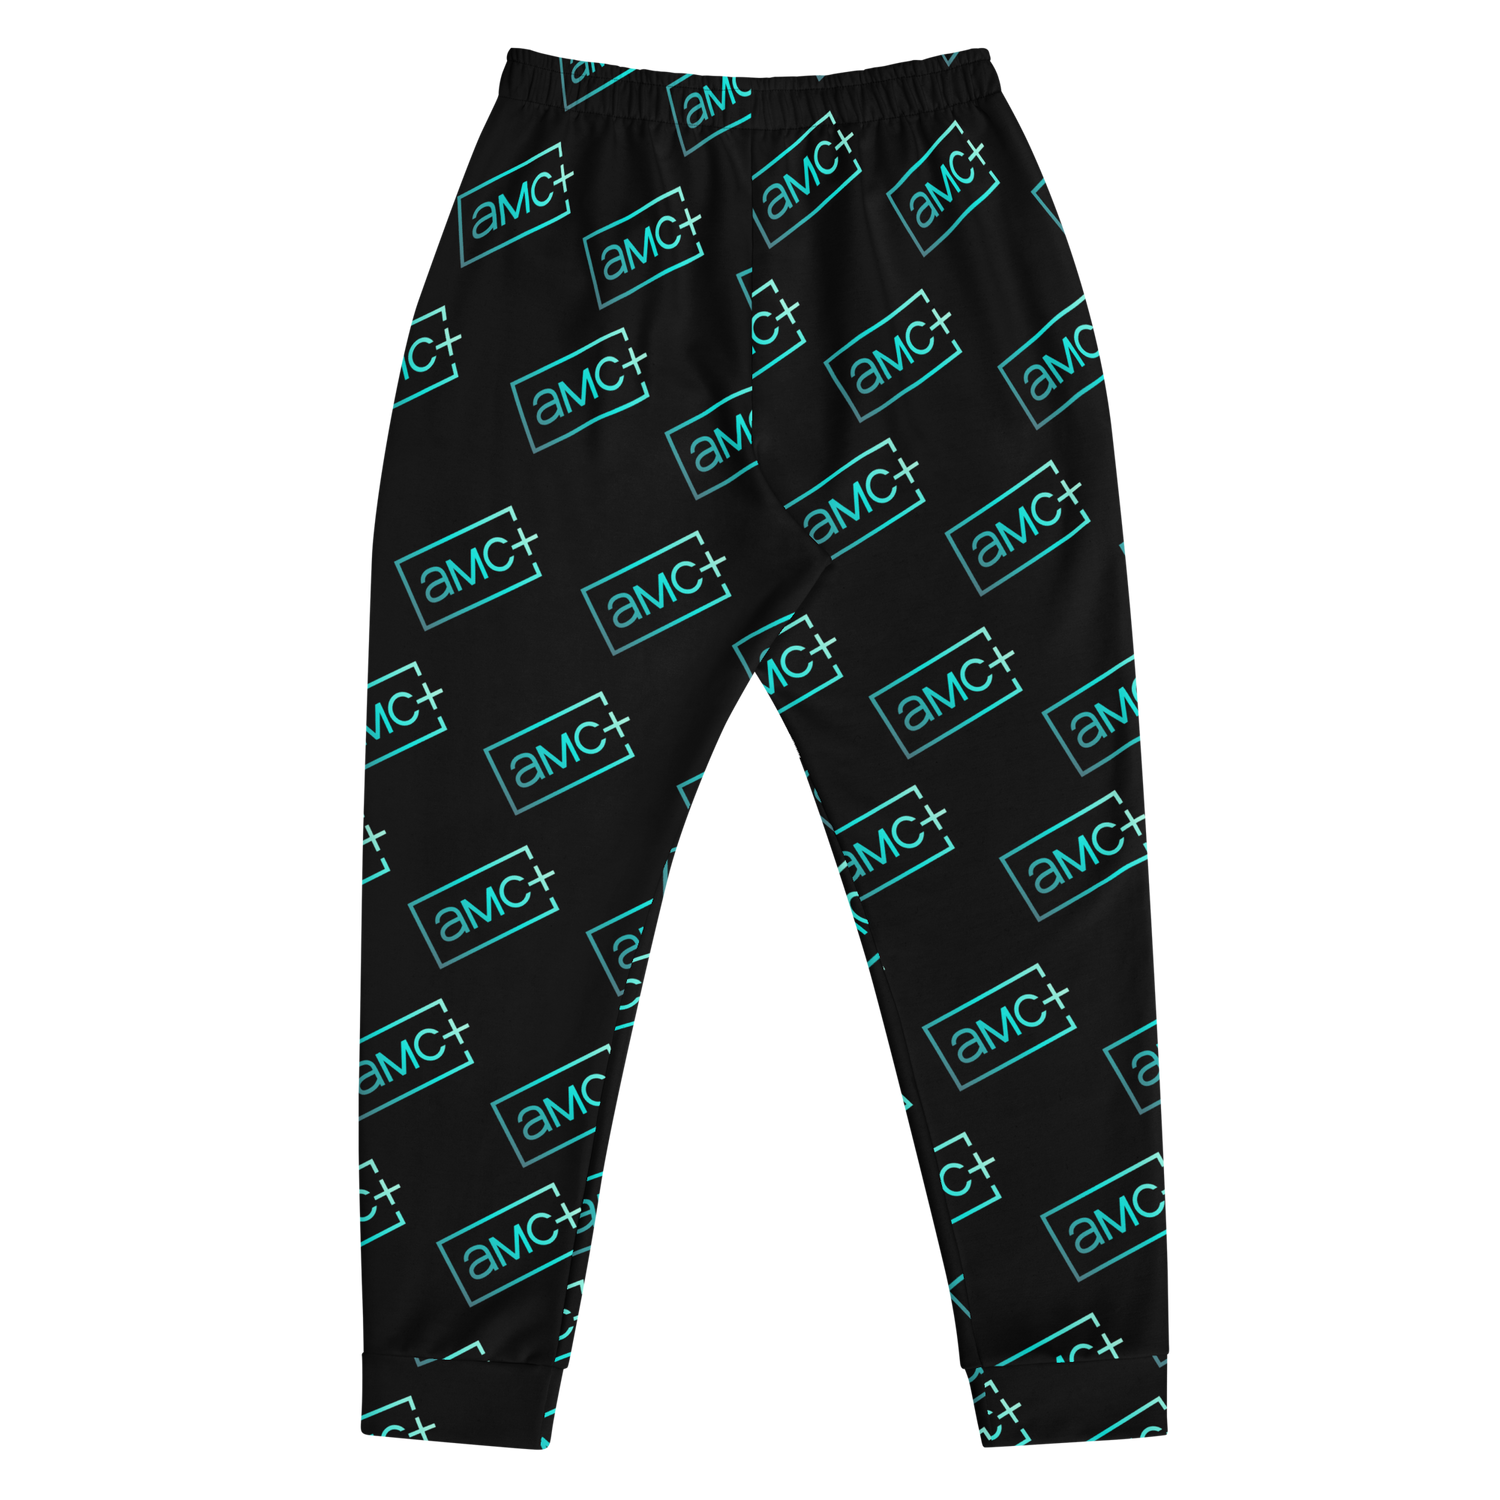 Rick and Morty Men's Graphic Joggers Sweatpants, Sizes S-2XL 